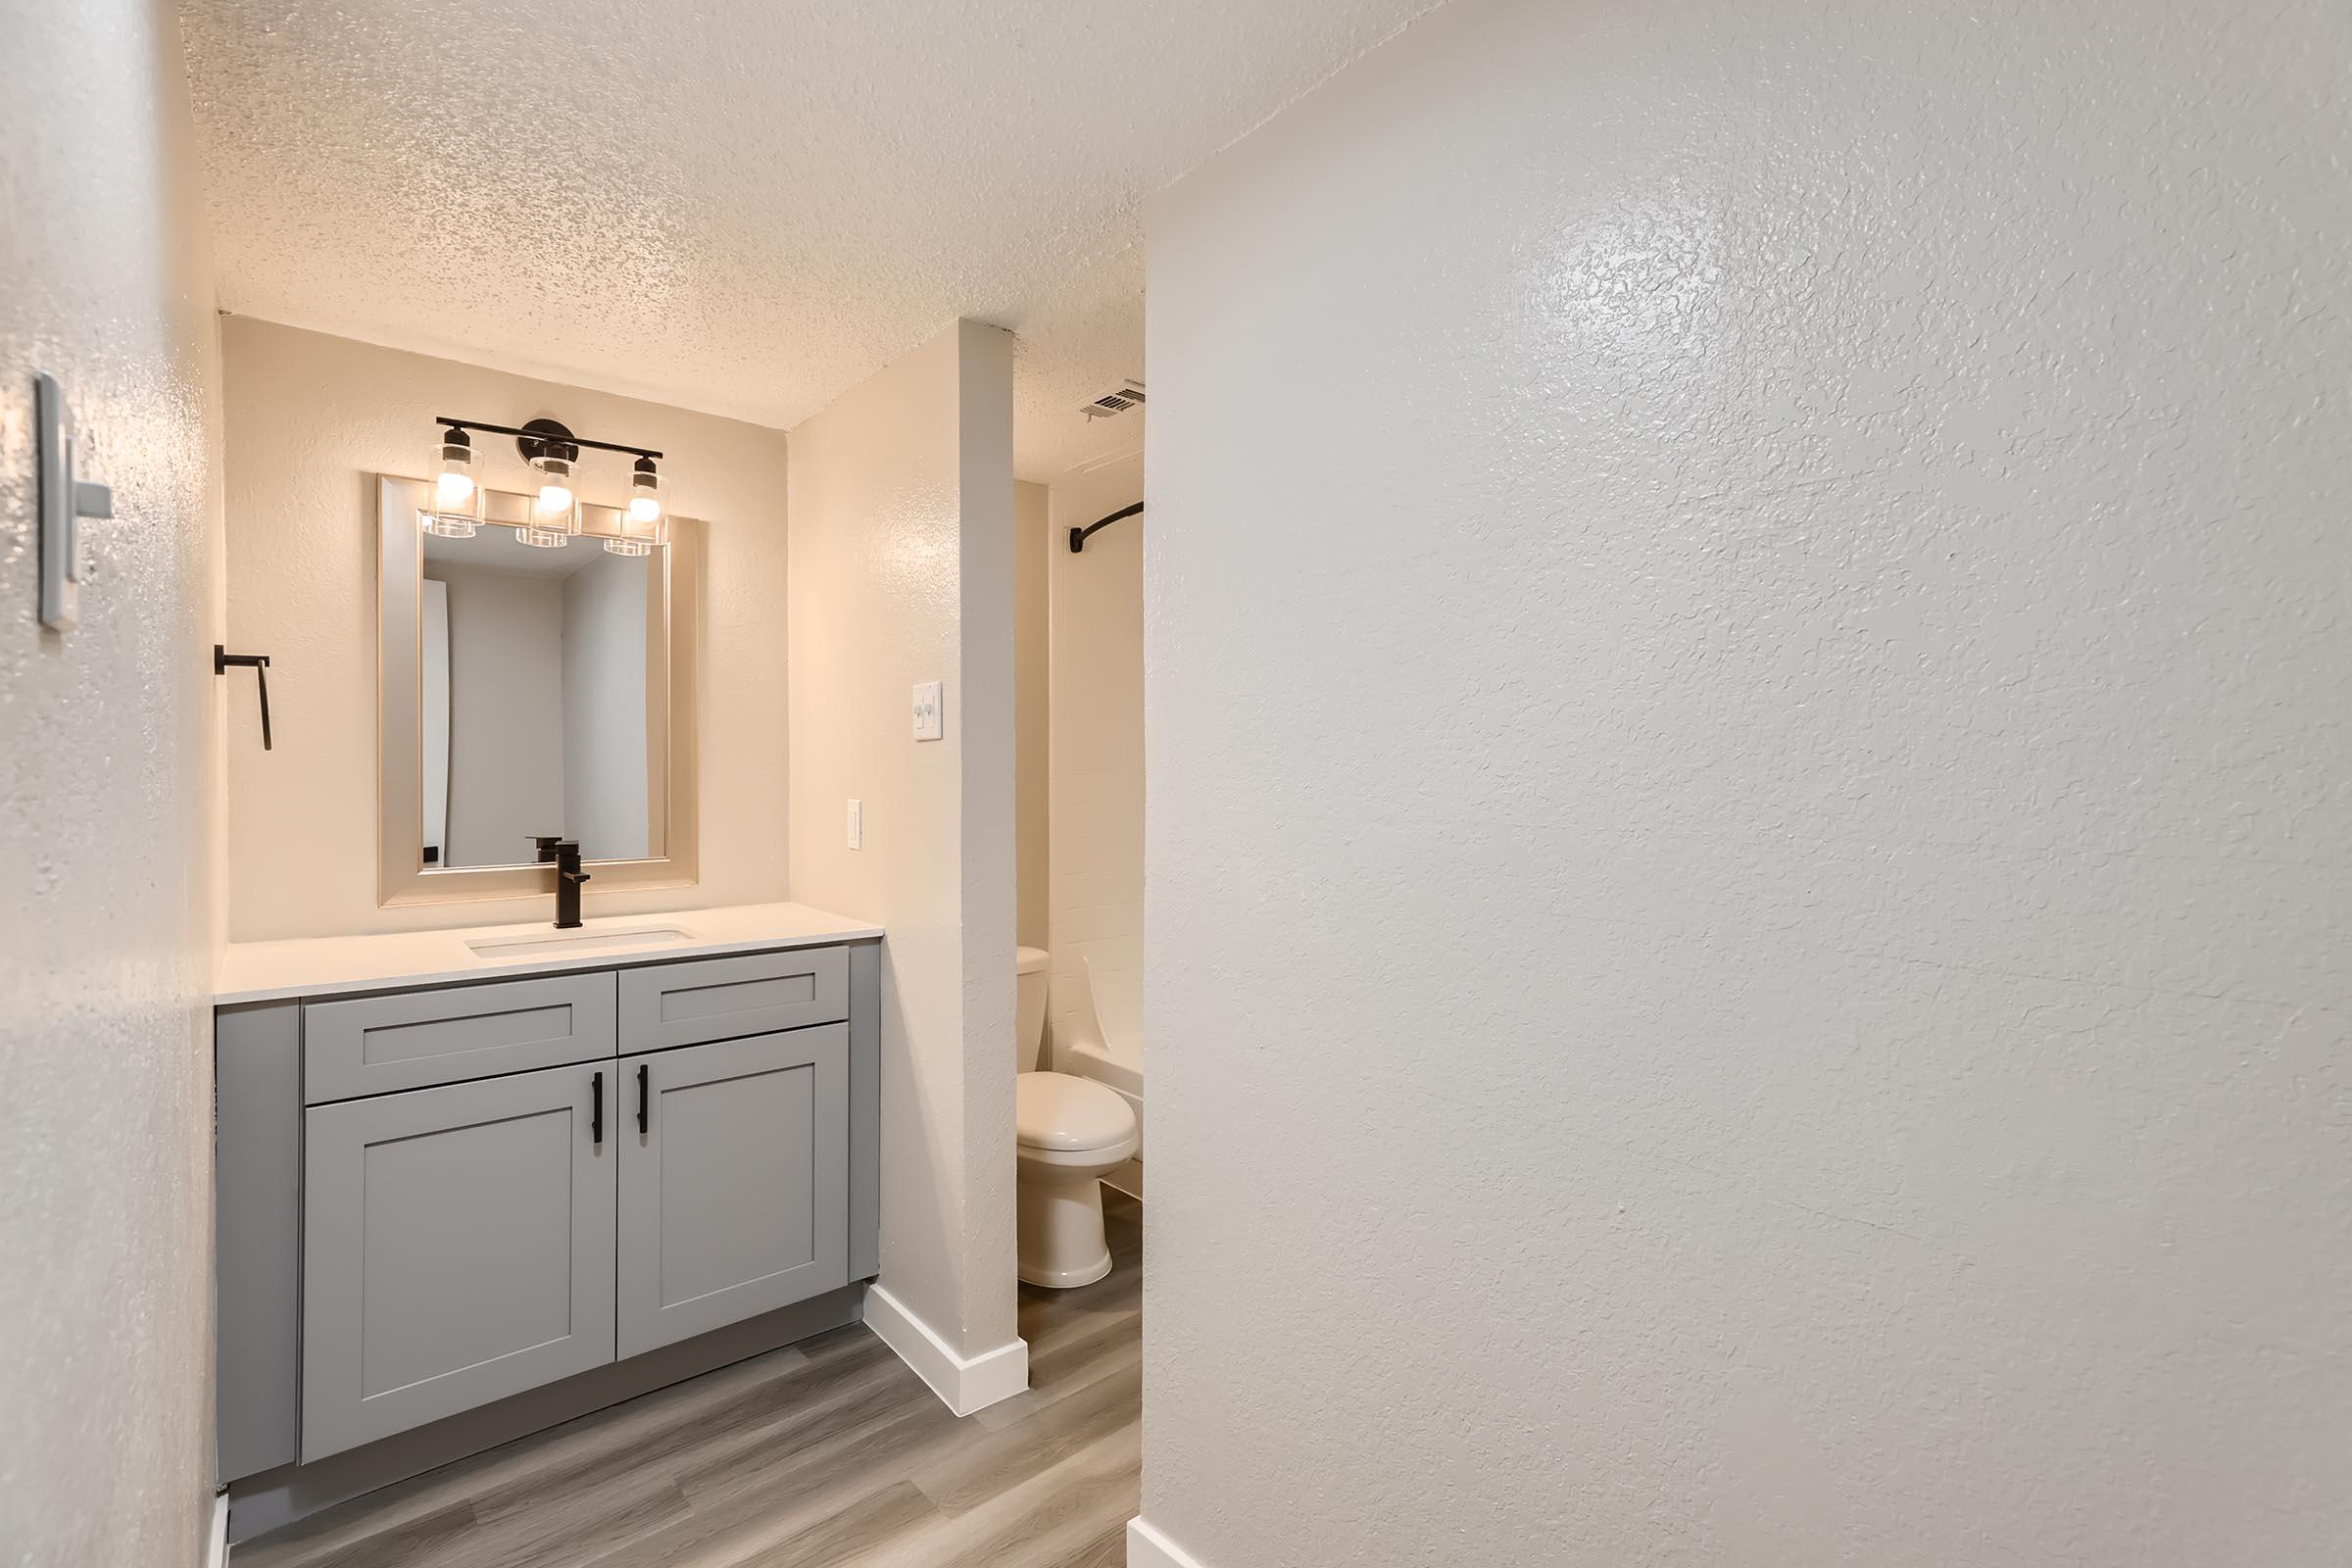 A remodeled bathroom with a separated toilet at Rise Oak Creek.